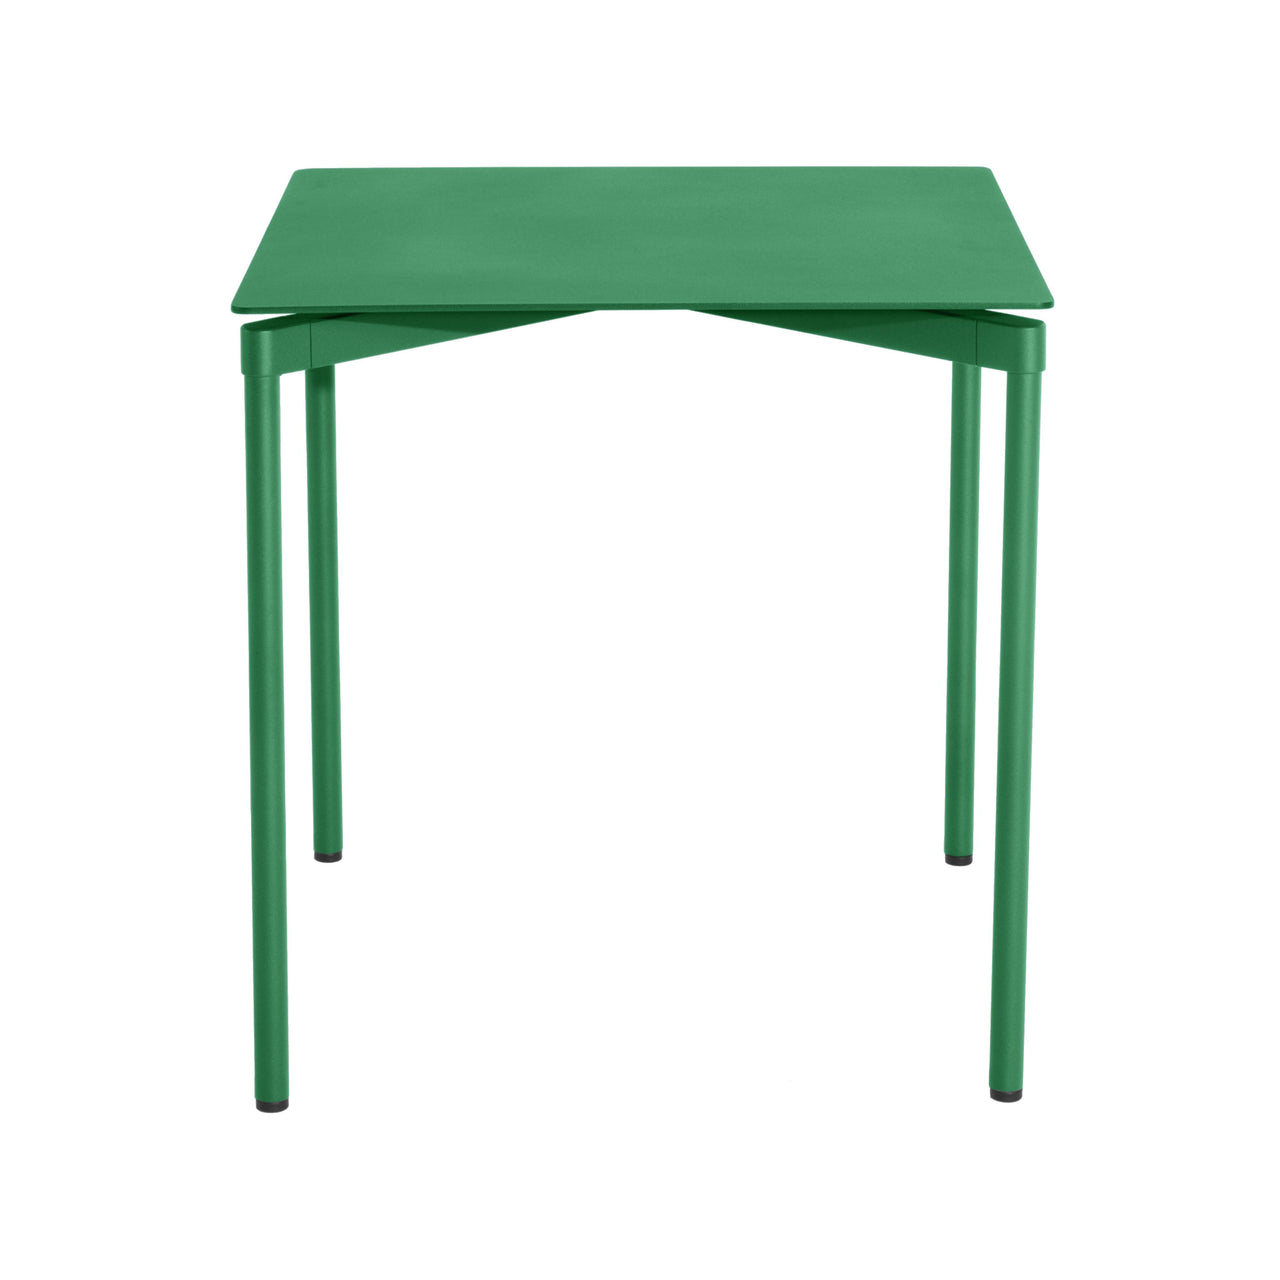 Fromme Dining Table: Outdoor + Square + Mint Green